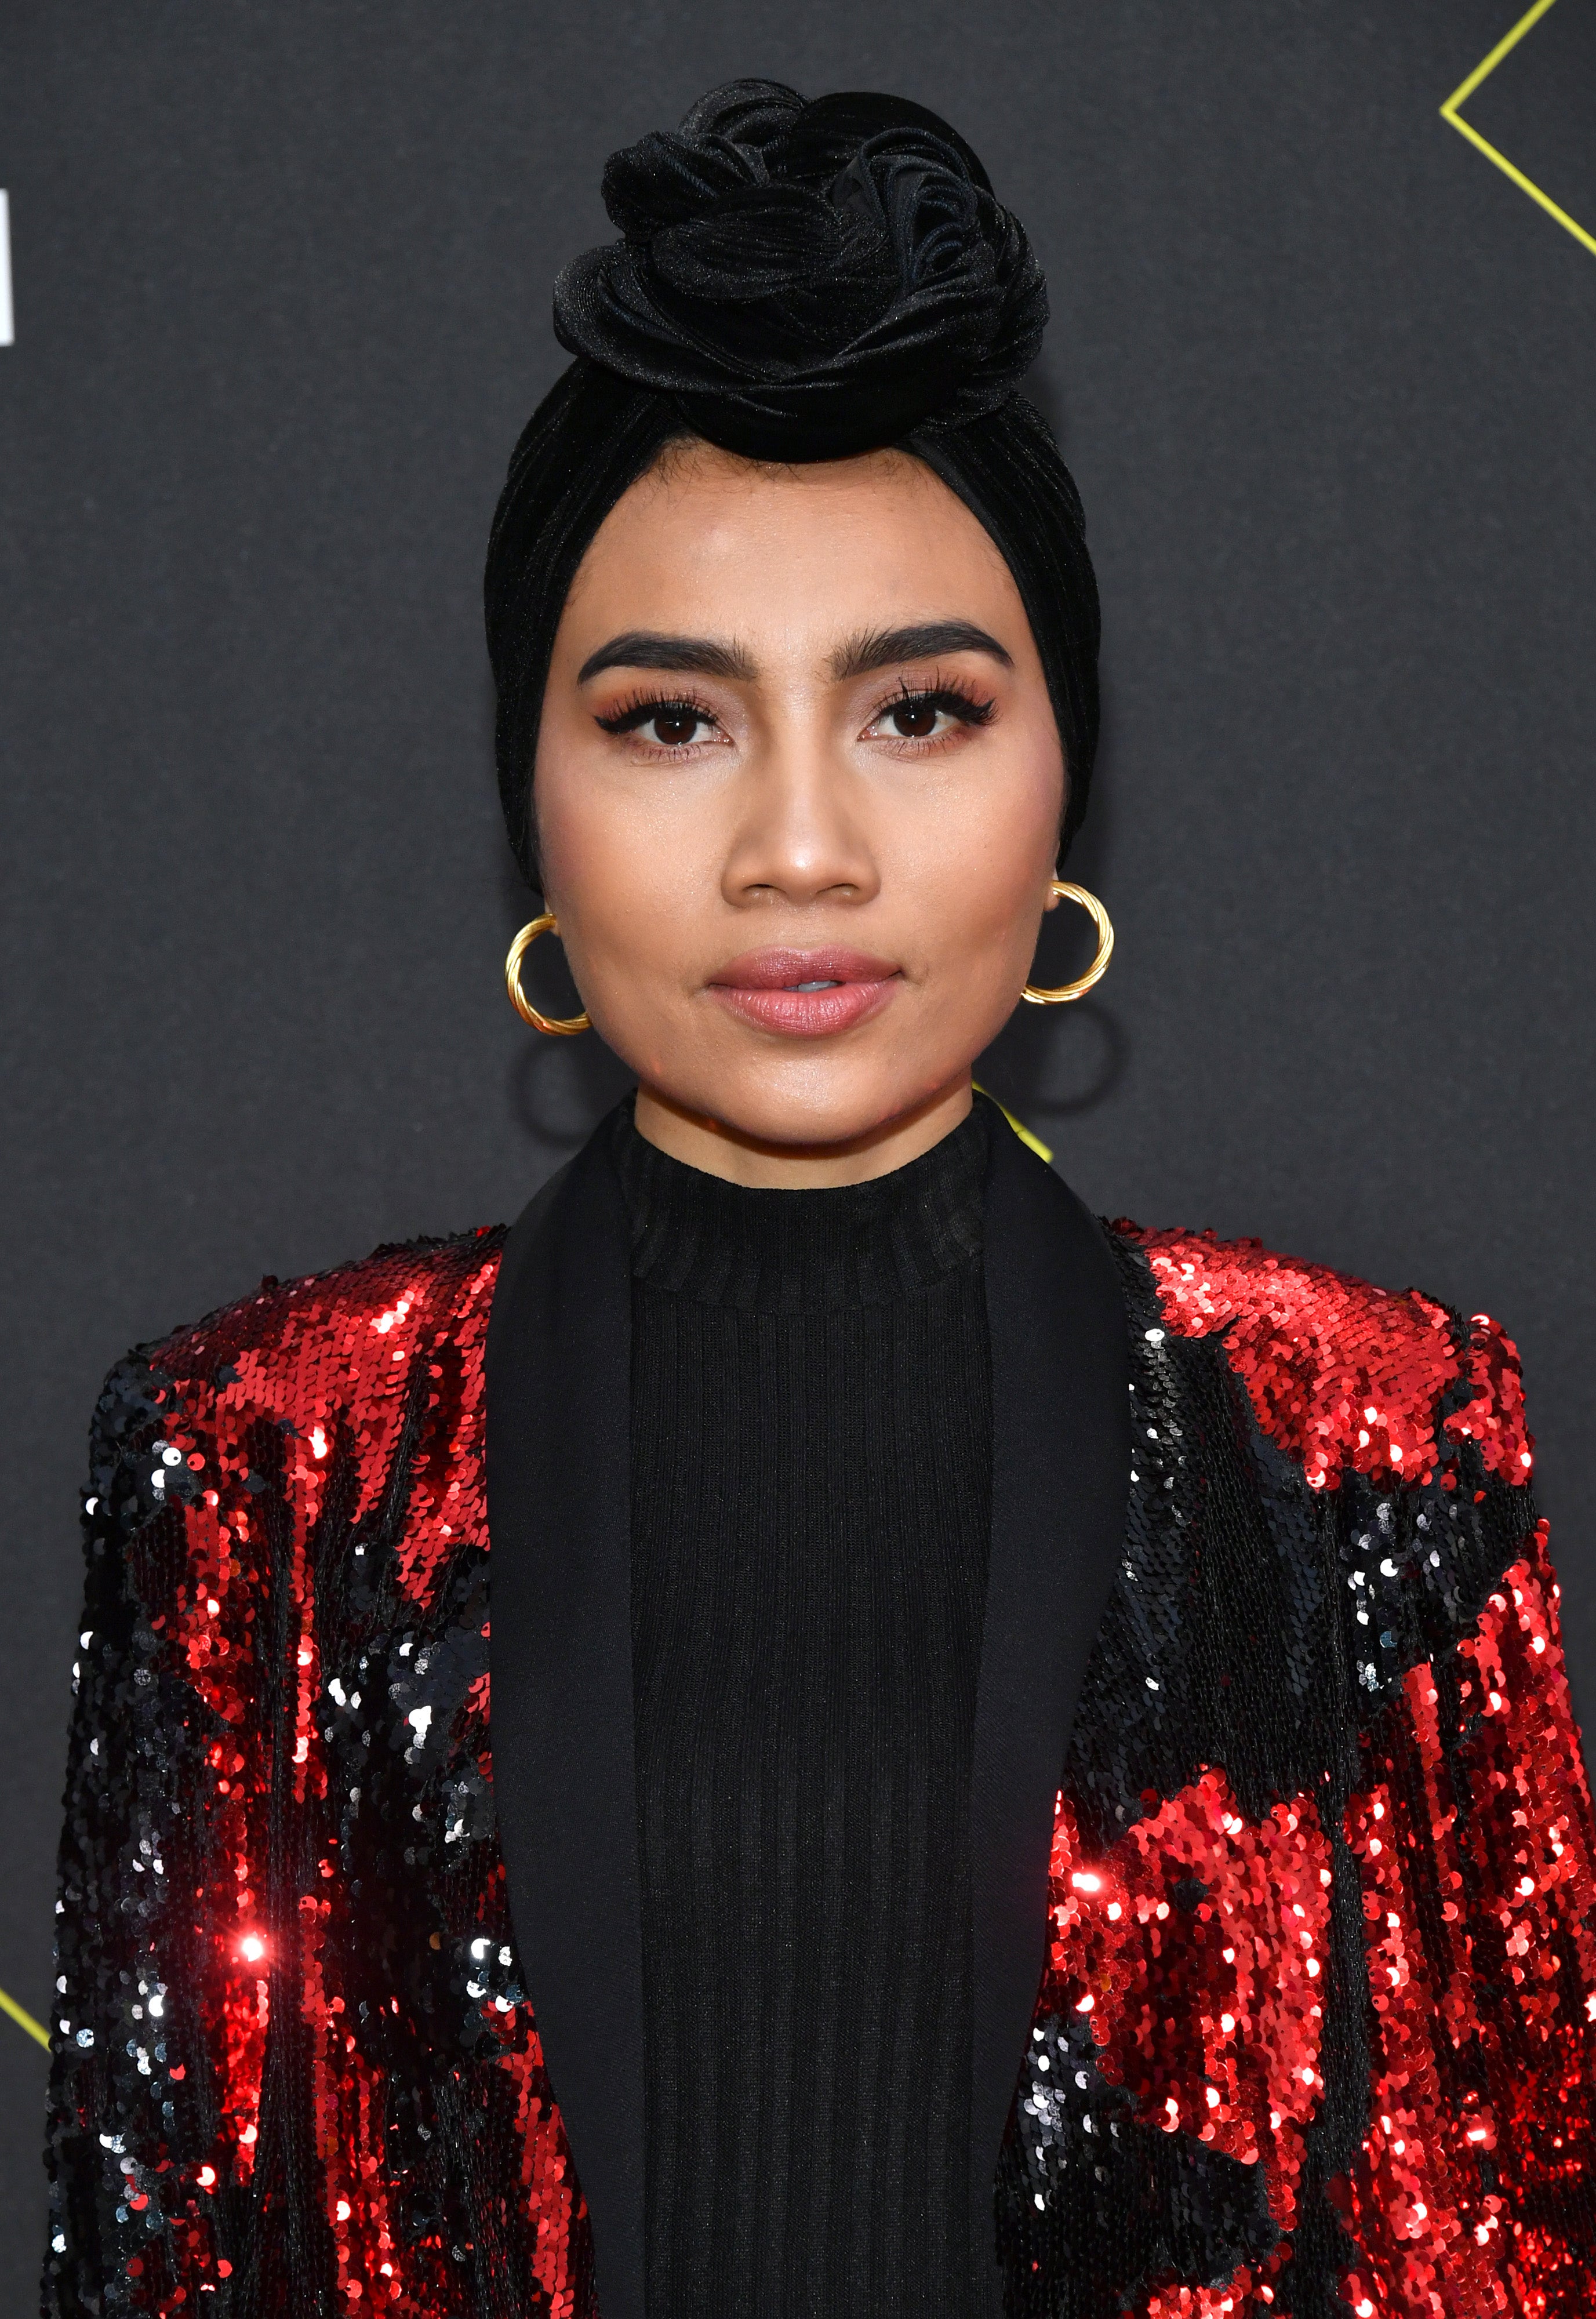 Celebrity Red Carpet Beauty From The 2019 E! People's Choice Awards